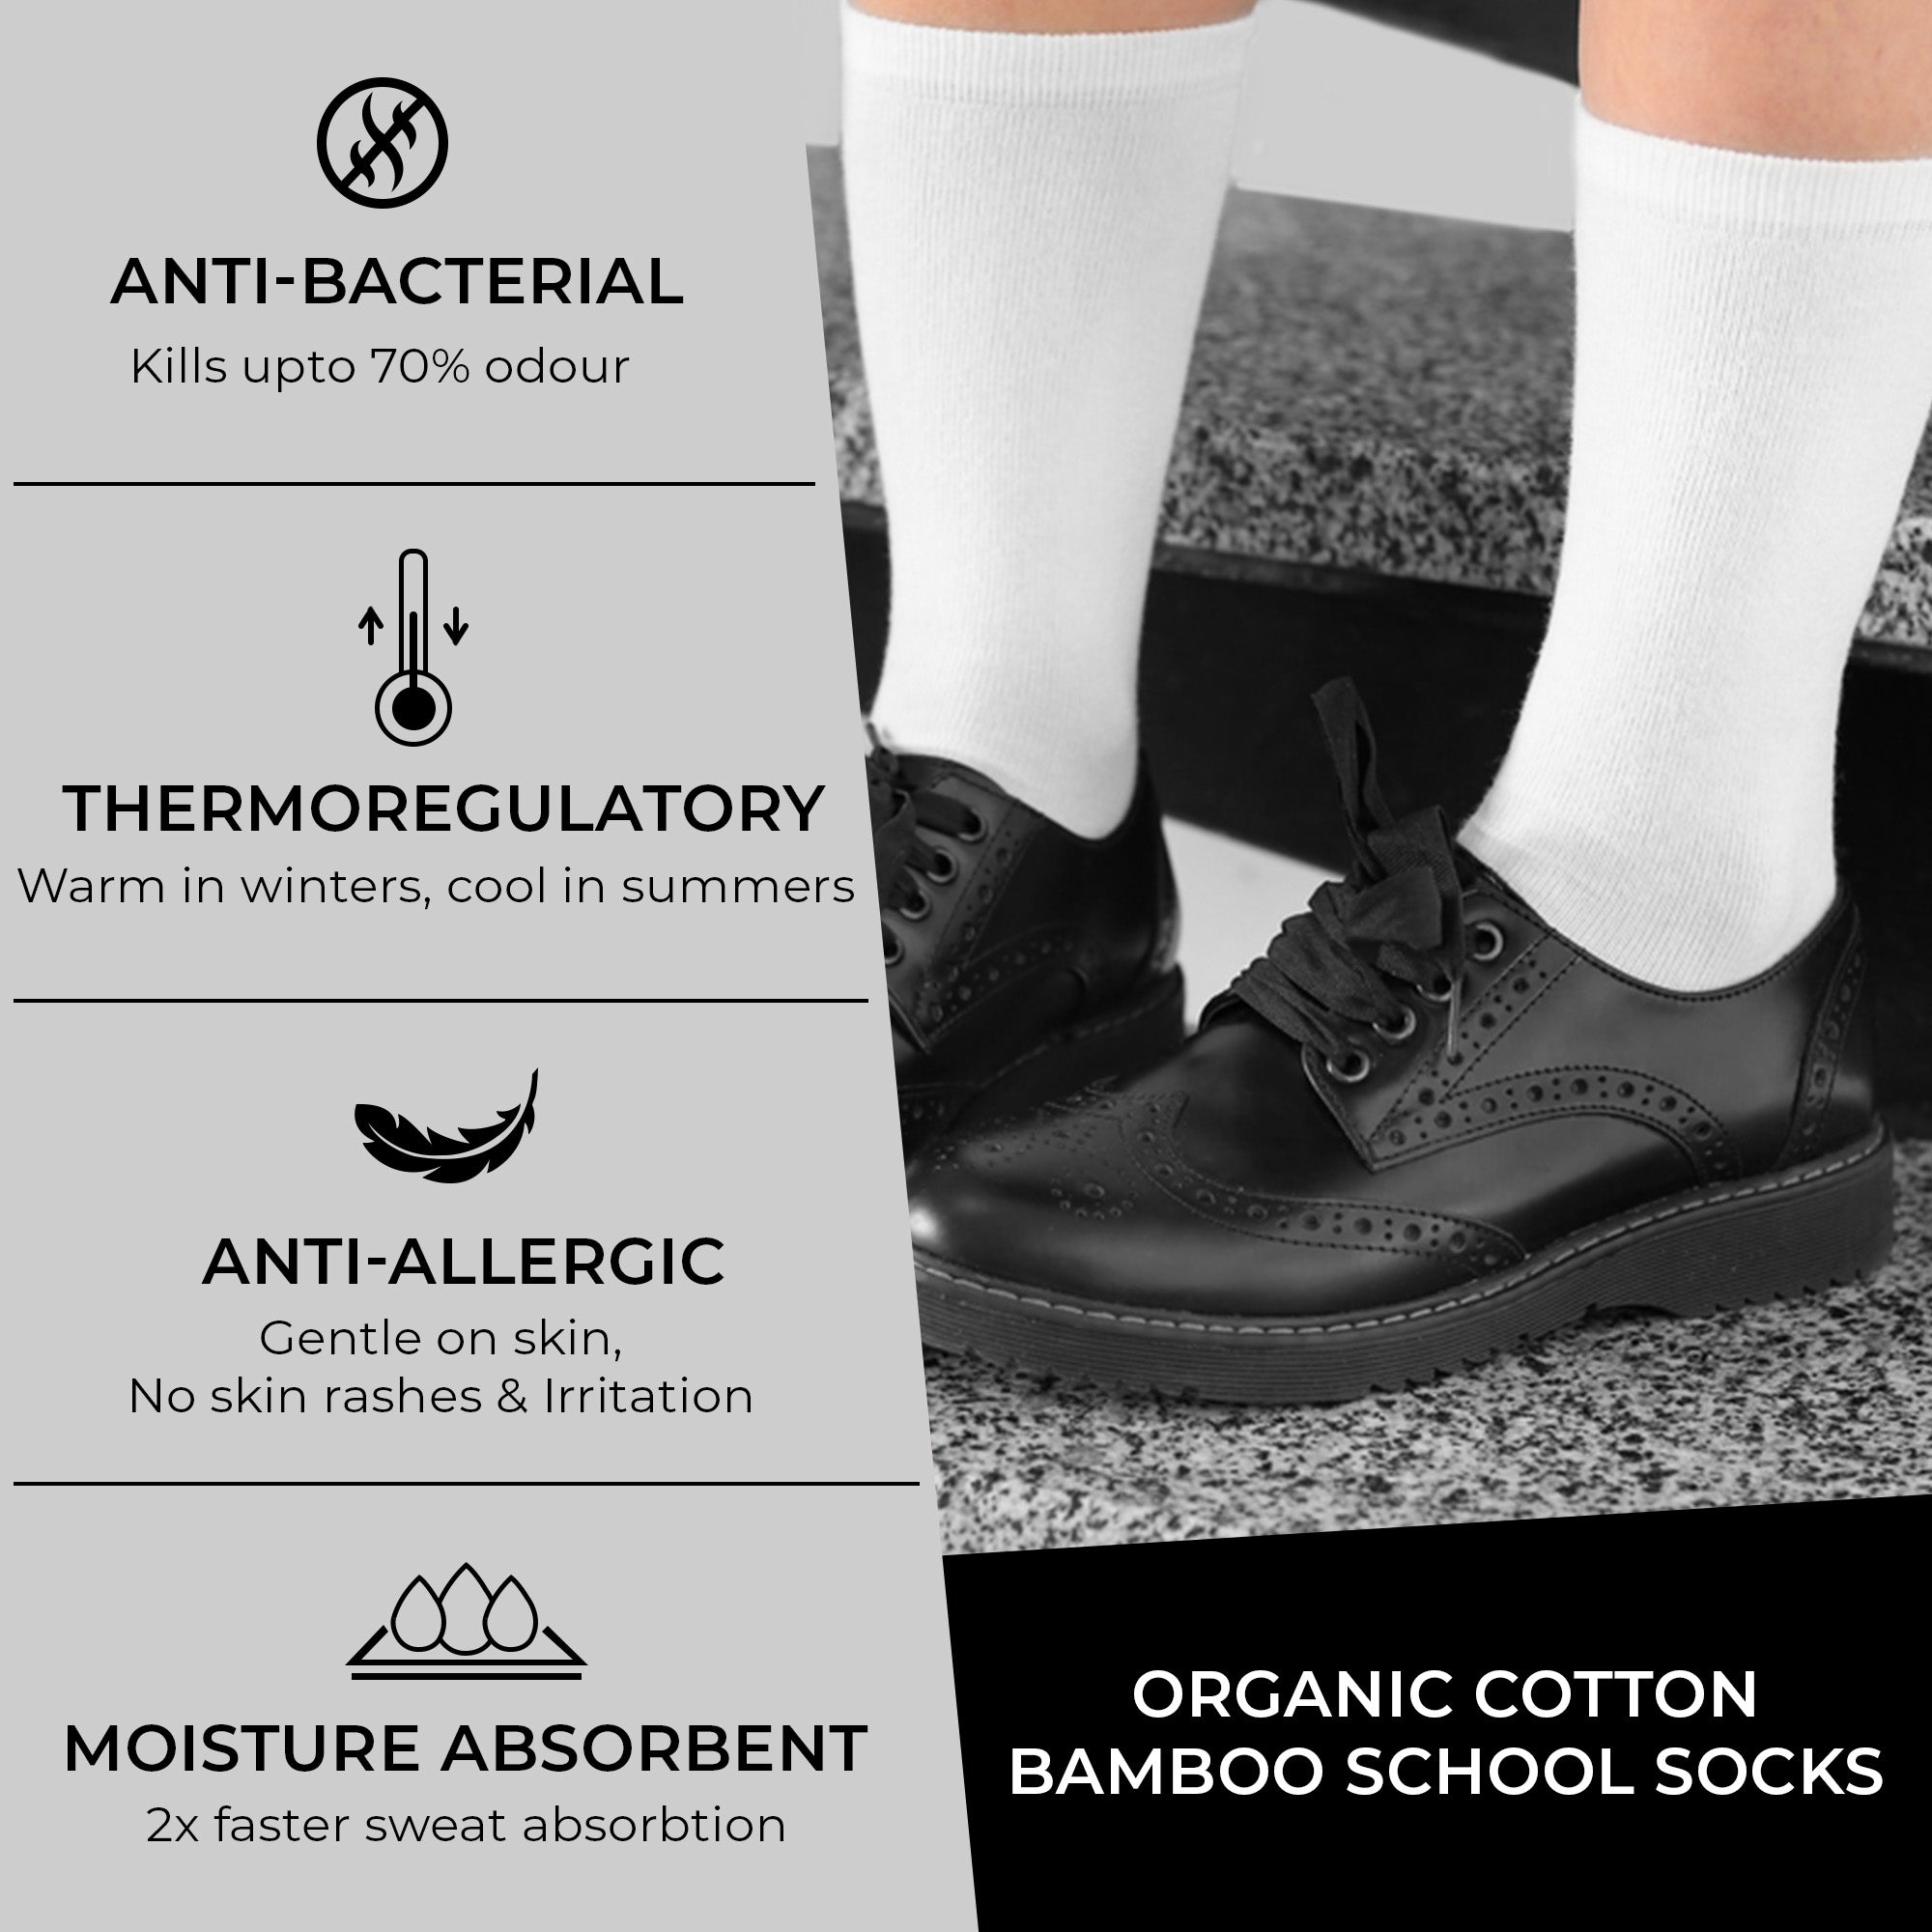 Kids Organic Cotton School Socks - Unisex - Calf length- Pack of 5 (Black and White)- Extra soft and Breathable